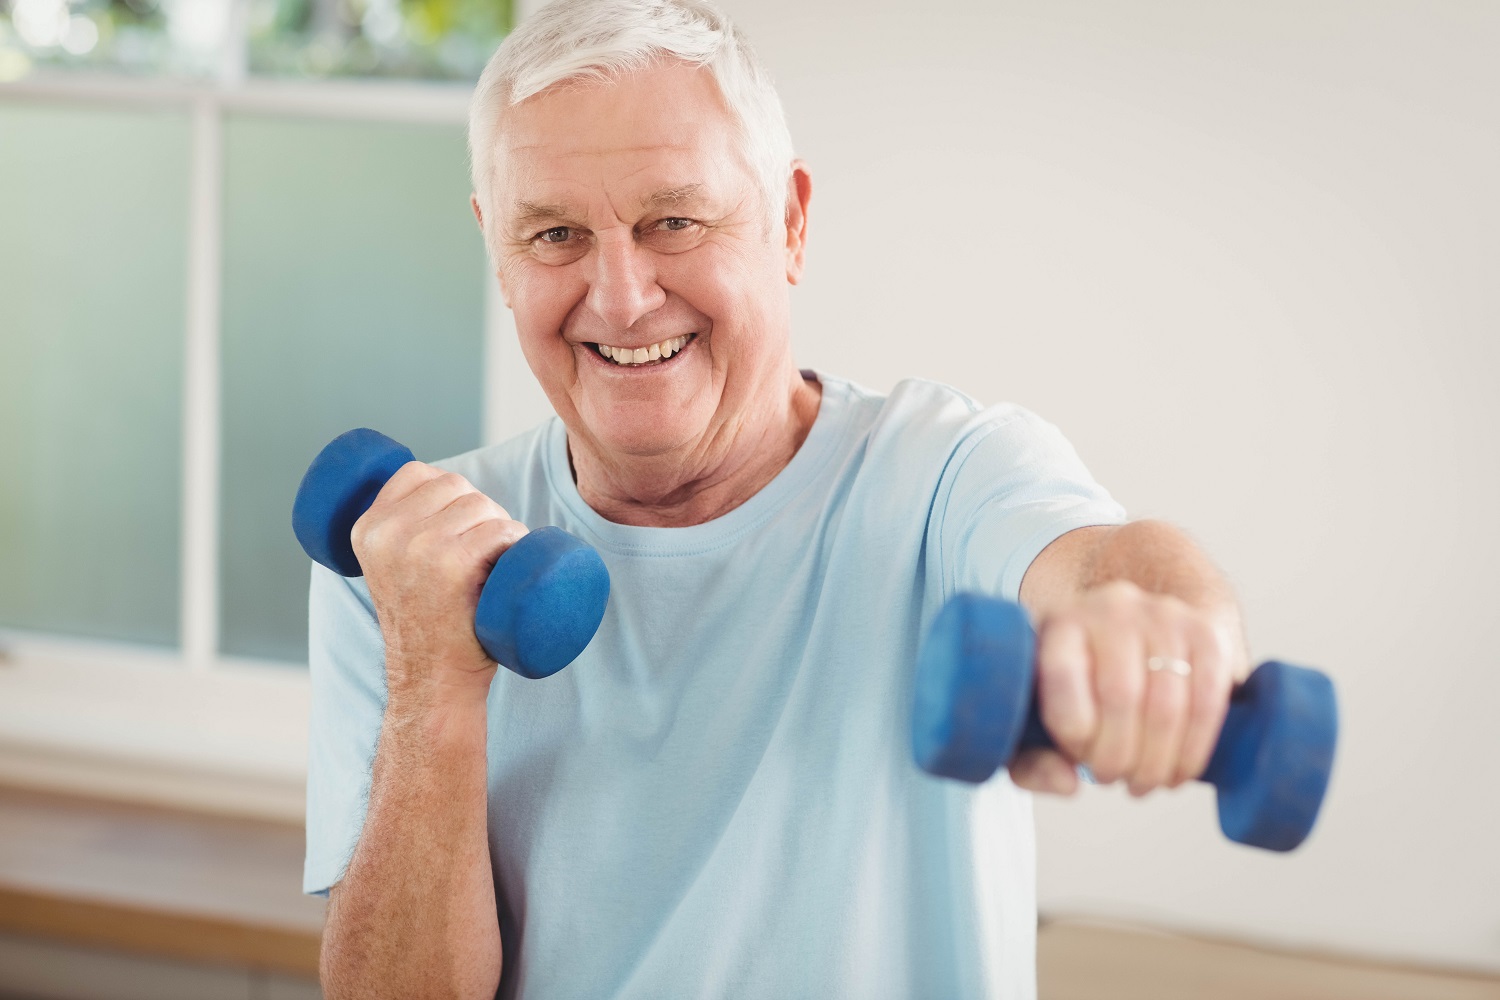 https://assistinghands.com/34/wp-content/uploads/sites/59/2022/03/Tips-to-Motivate-Seniors-to-Exercise.jpeg